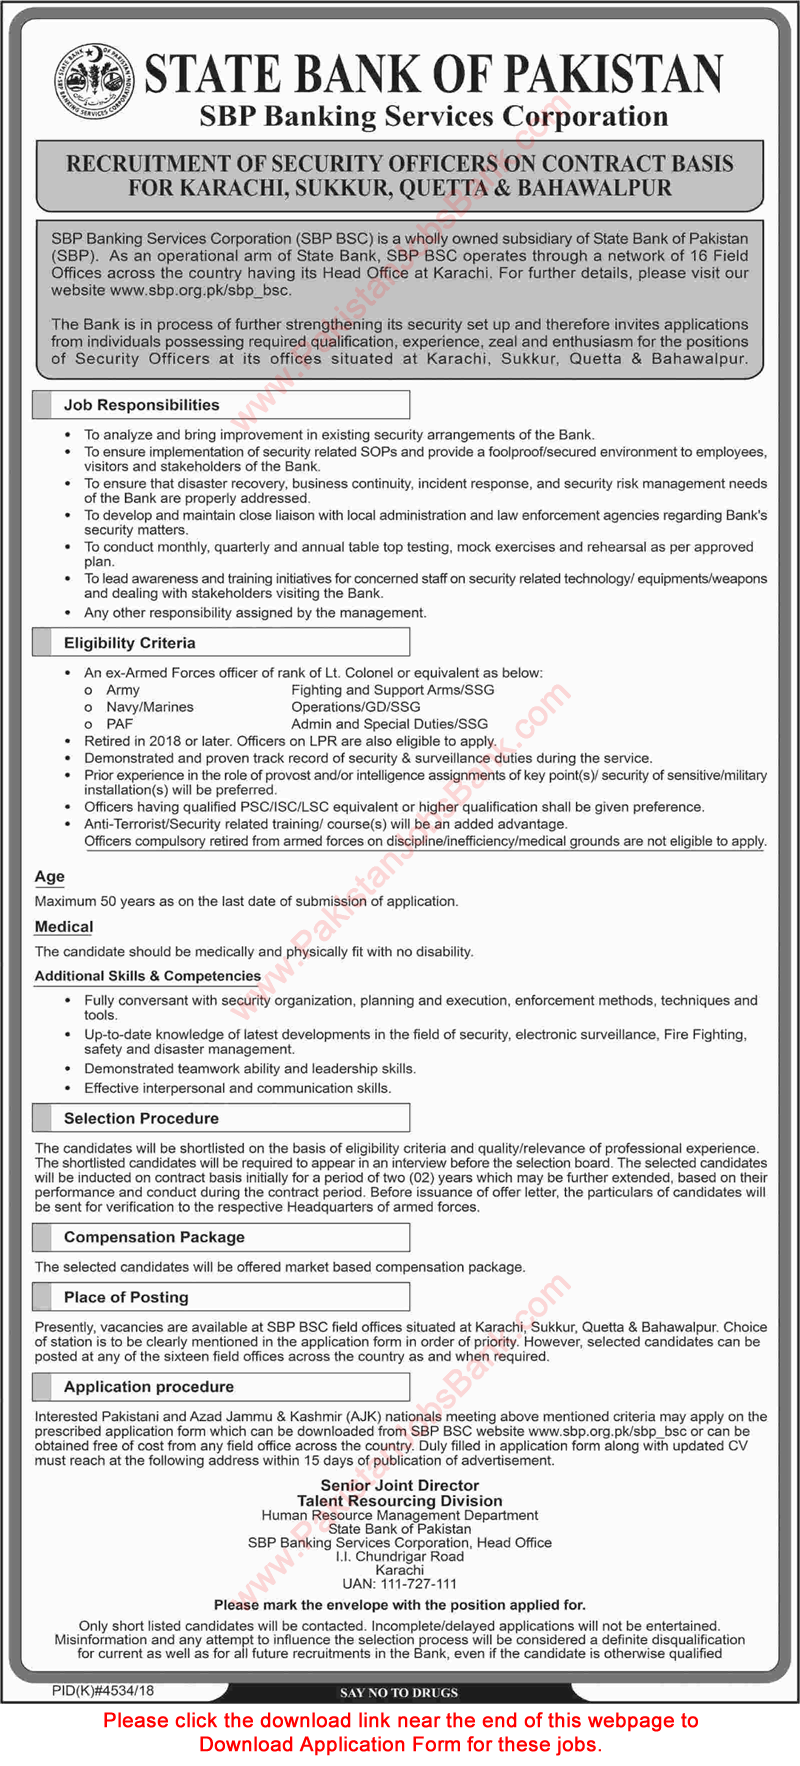 Security Officer Jobs in State Bank of Pakistan June 2019 Application Form Download SBP Latest